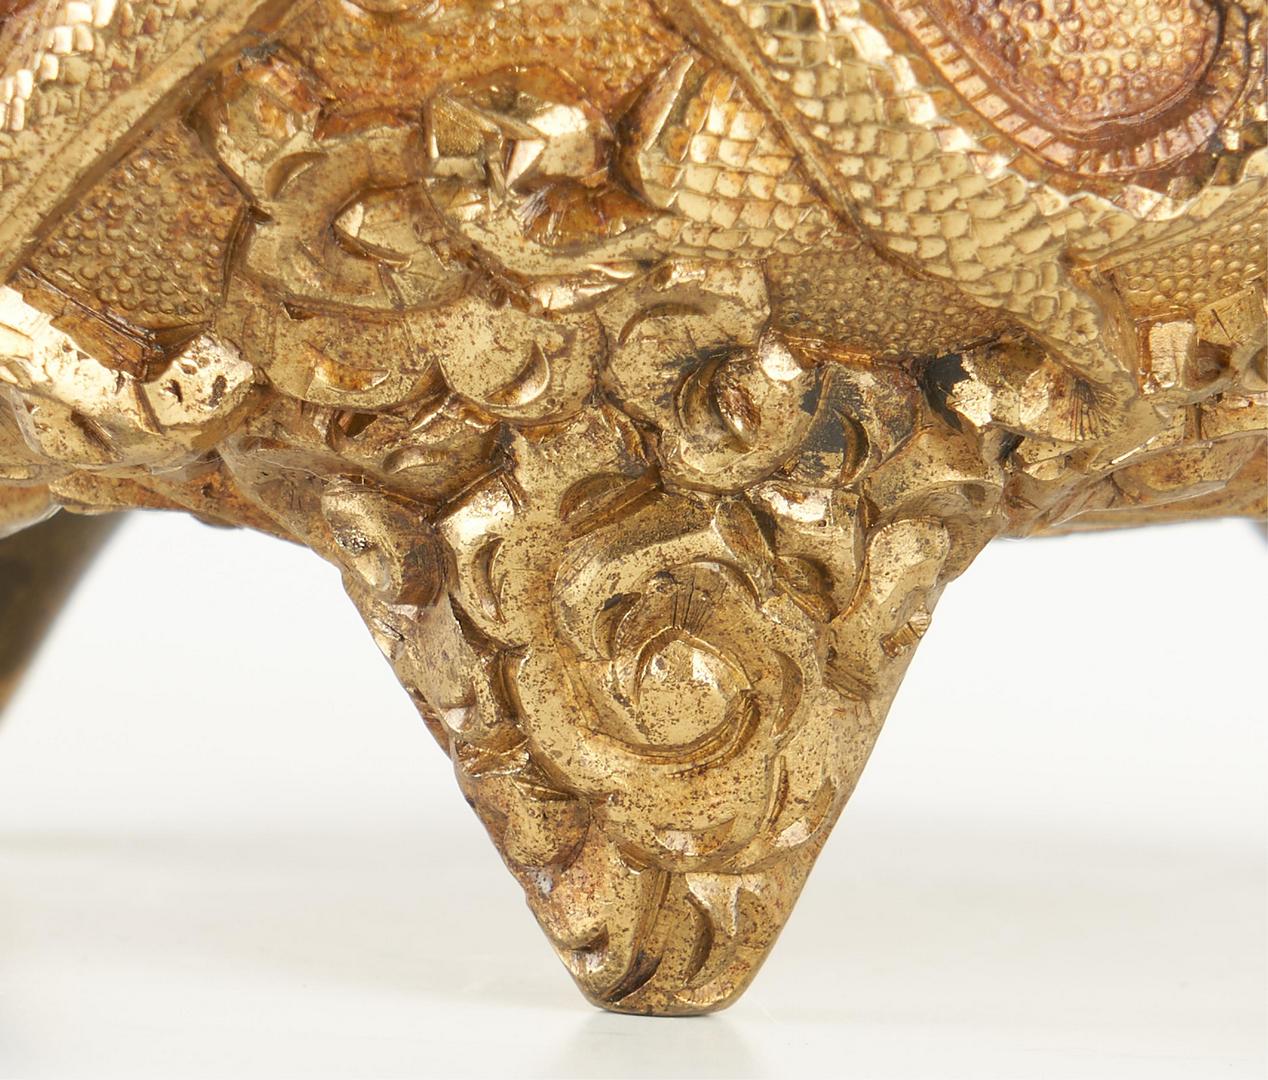 Lot 10: Chinese Gilt Bronze Censer with Dragon Relief Decoration